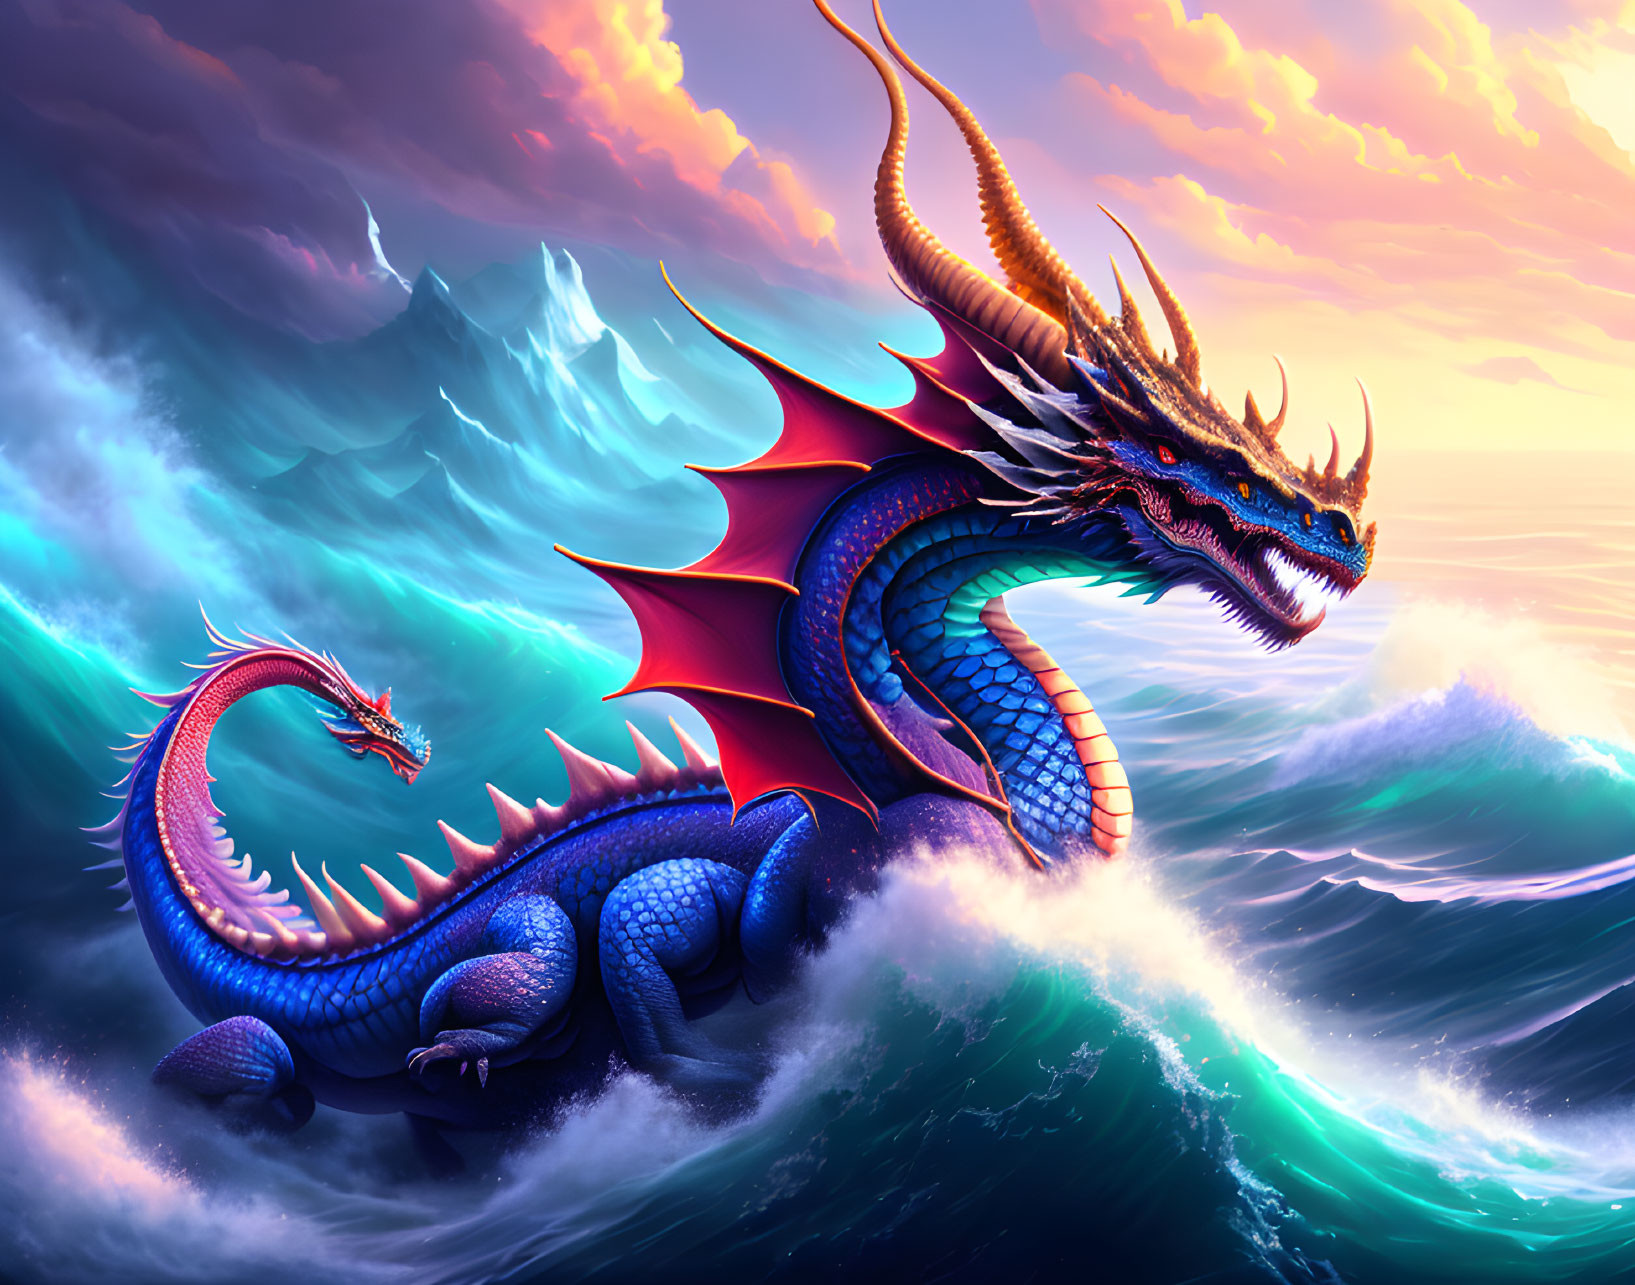 Majestic blue dragon with red wings in vibrant sunset scene